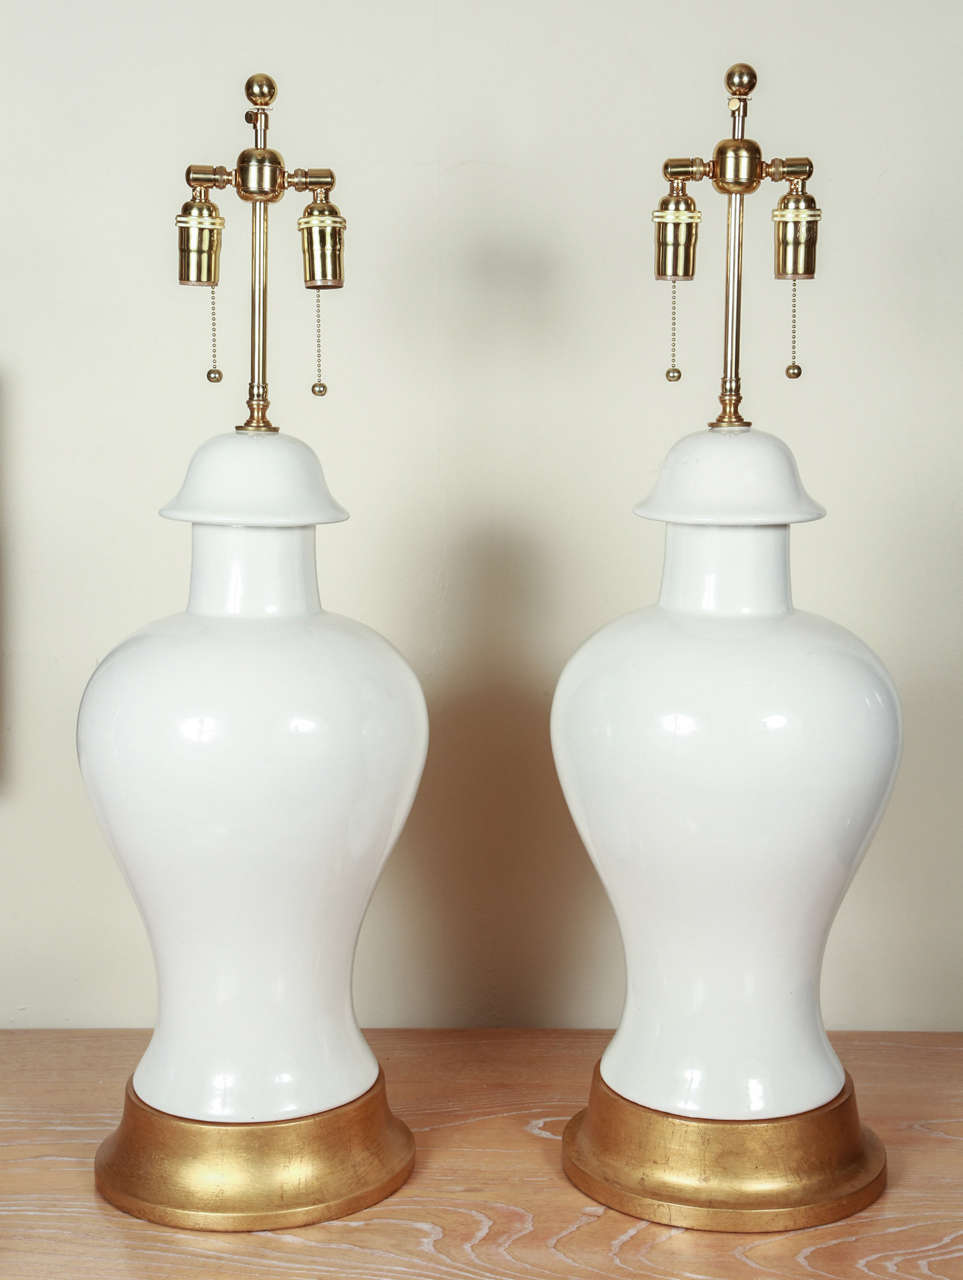 Pair of very large ginger jar style ceramic lamps.  The glaze is glossy white, with no crackling.   They are up on gilded wooden bases, and are newly rewired with brass double clusters.